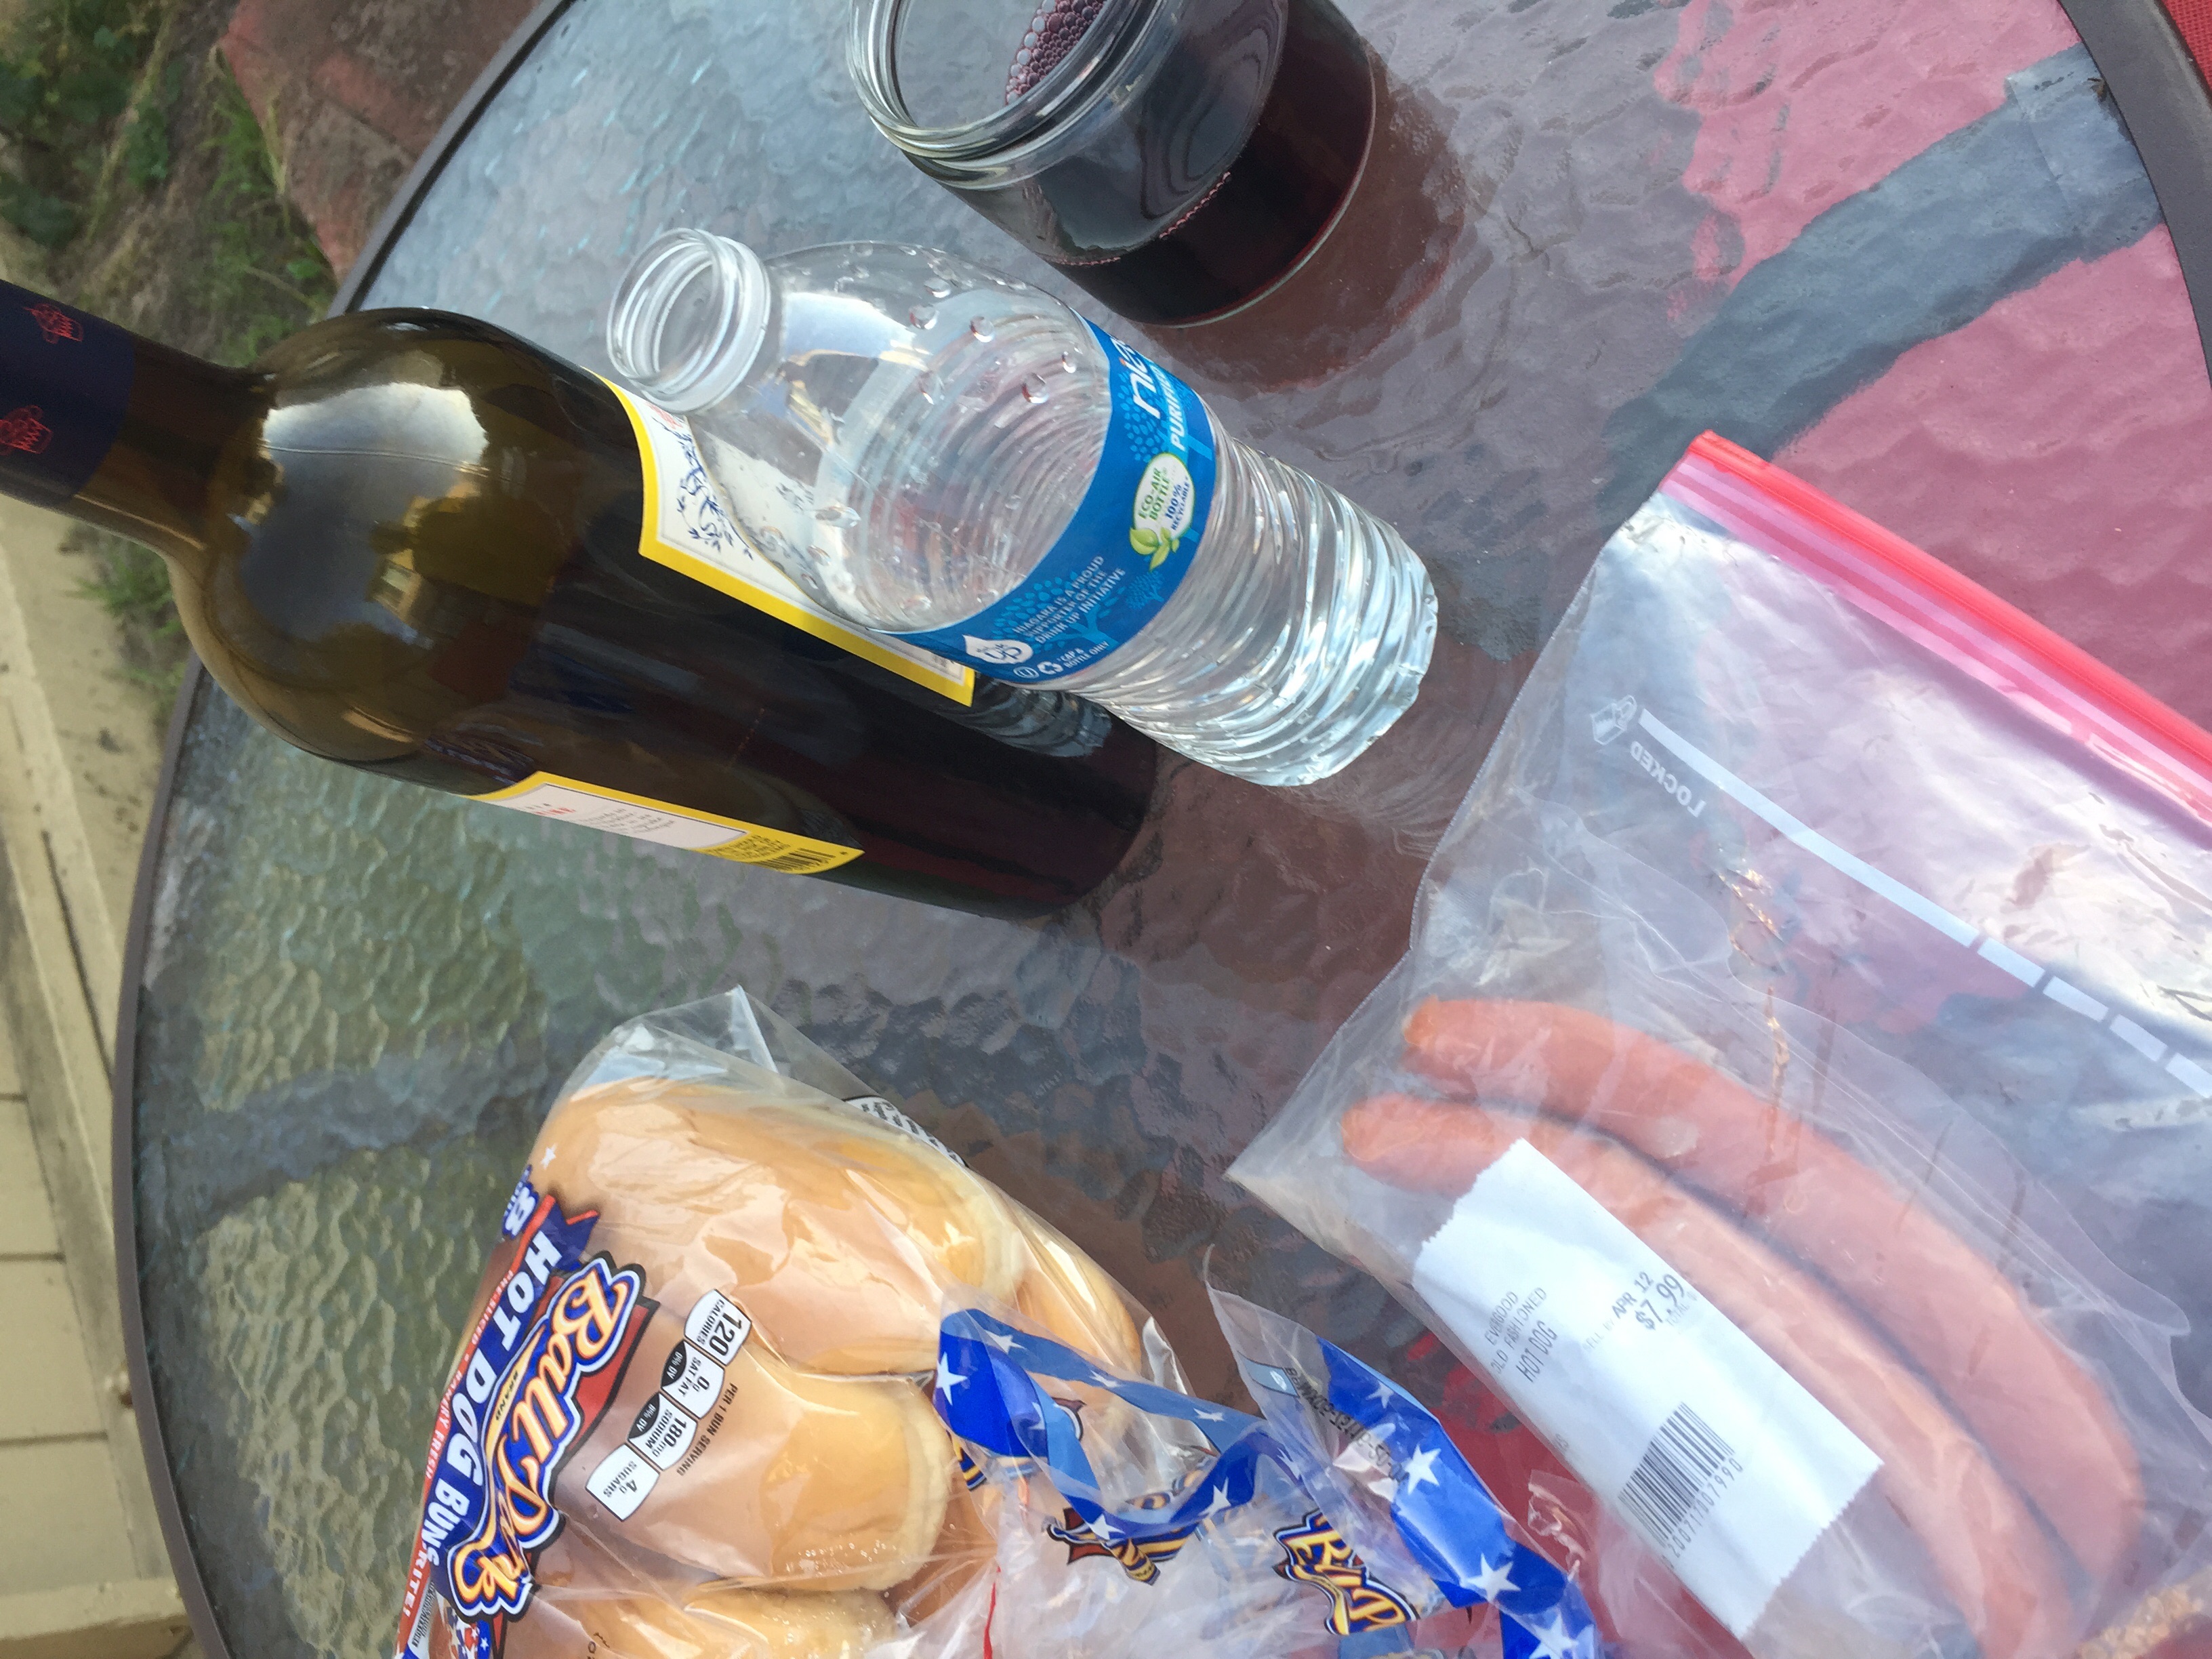 Hot dogs and wine for dinner lately. 